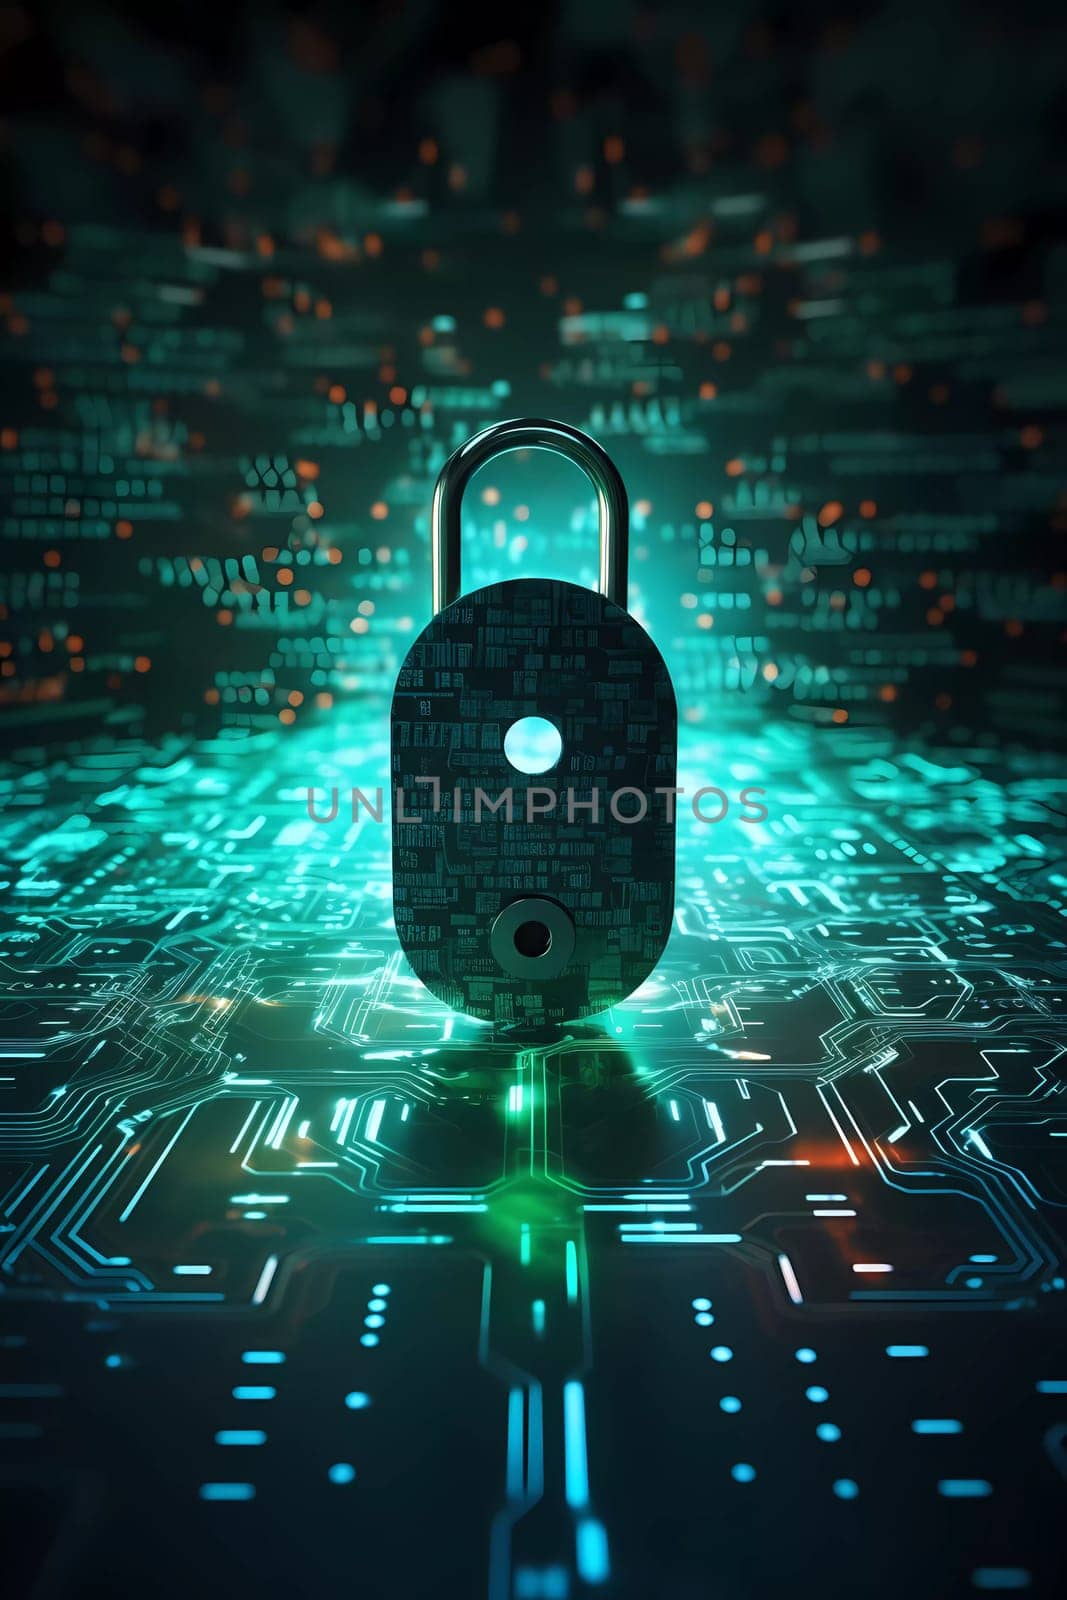 Digital padlock icon, cyber security network and data protection technology on virtual interface screen. Online internet authorized access against cyber attack and business data privacy concept. by sergeykoshkin